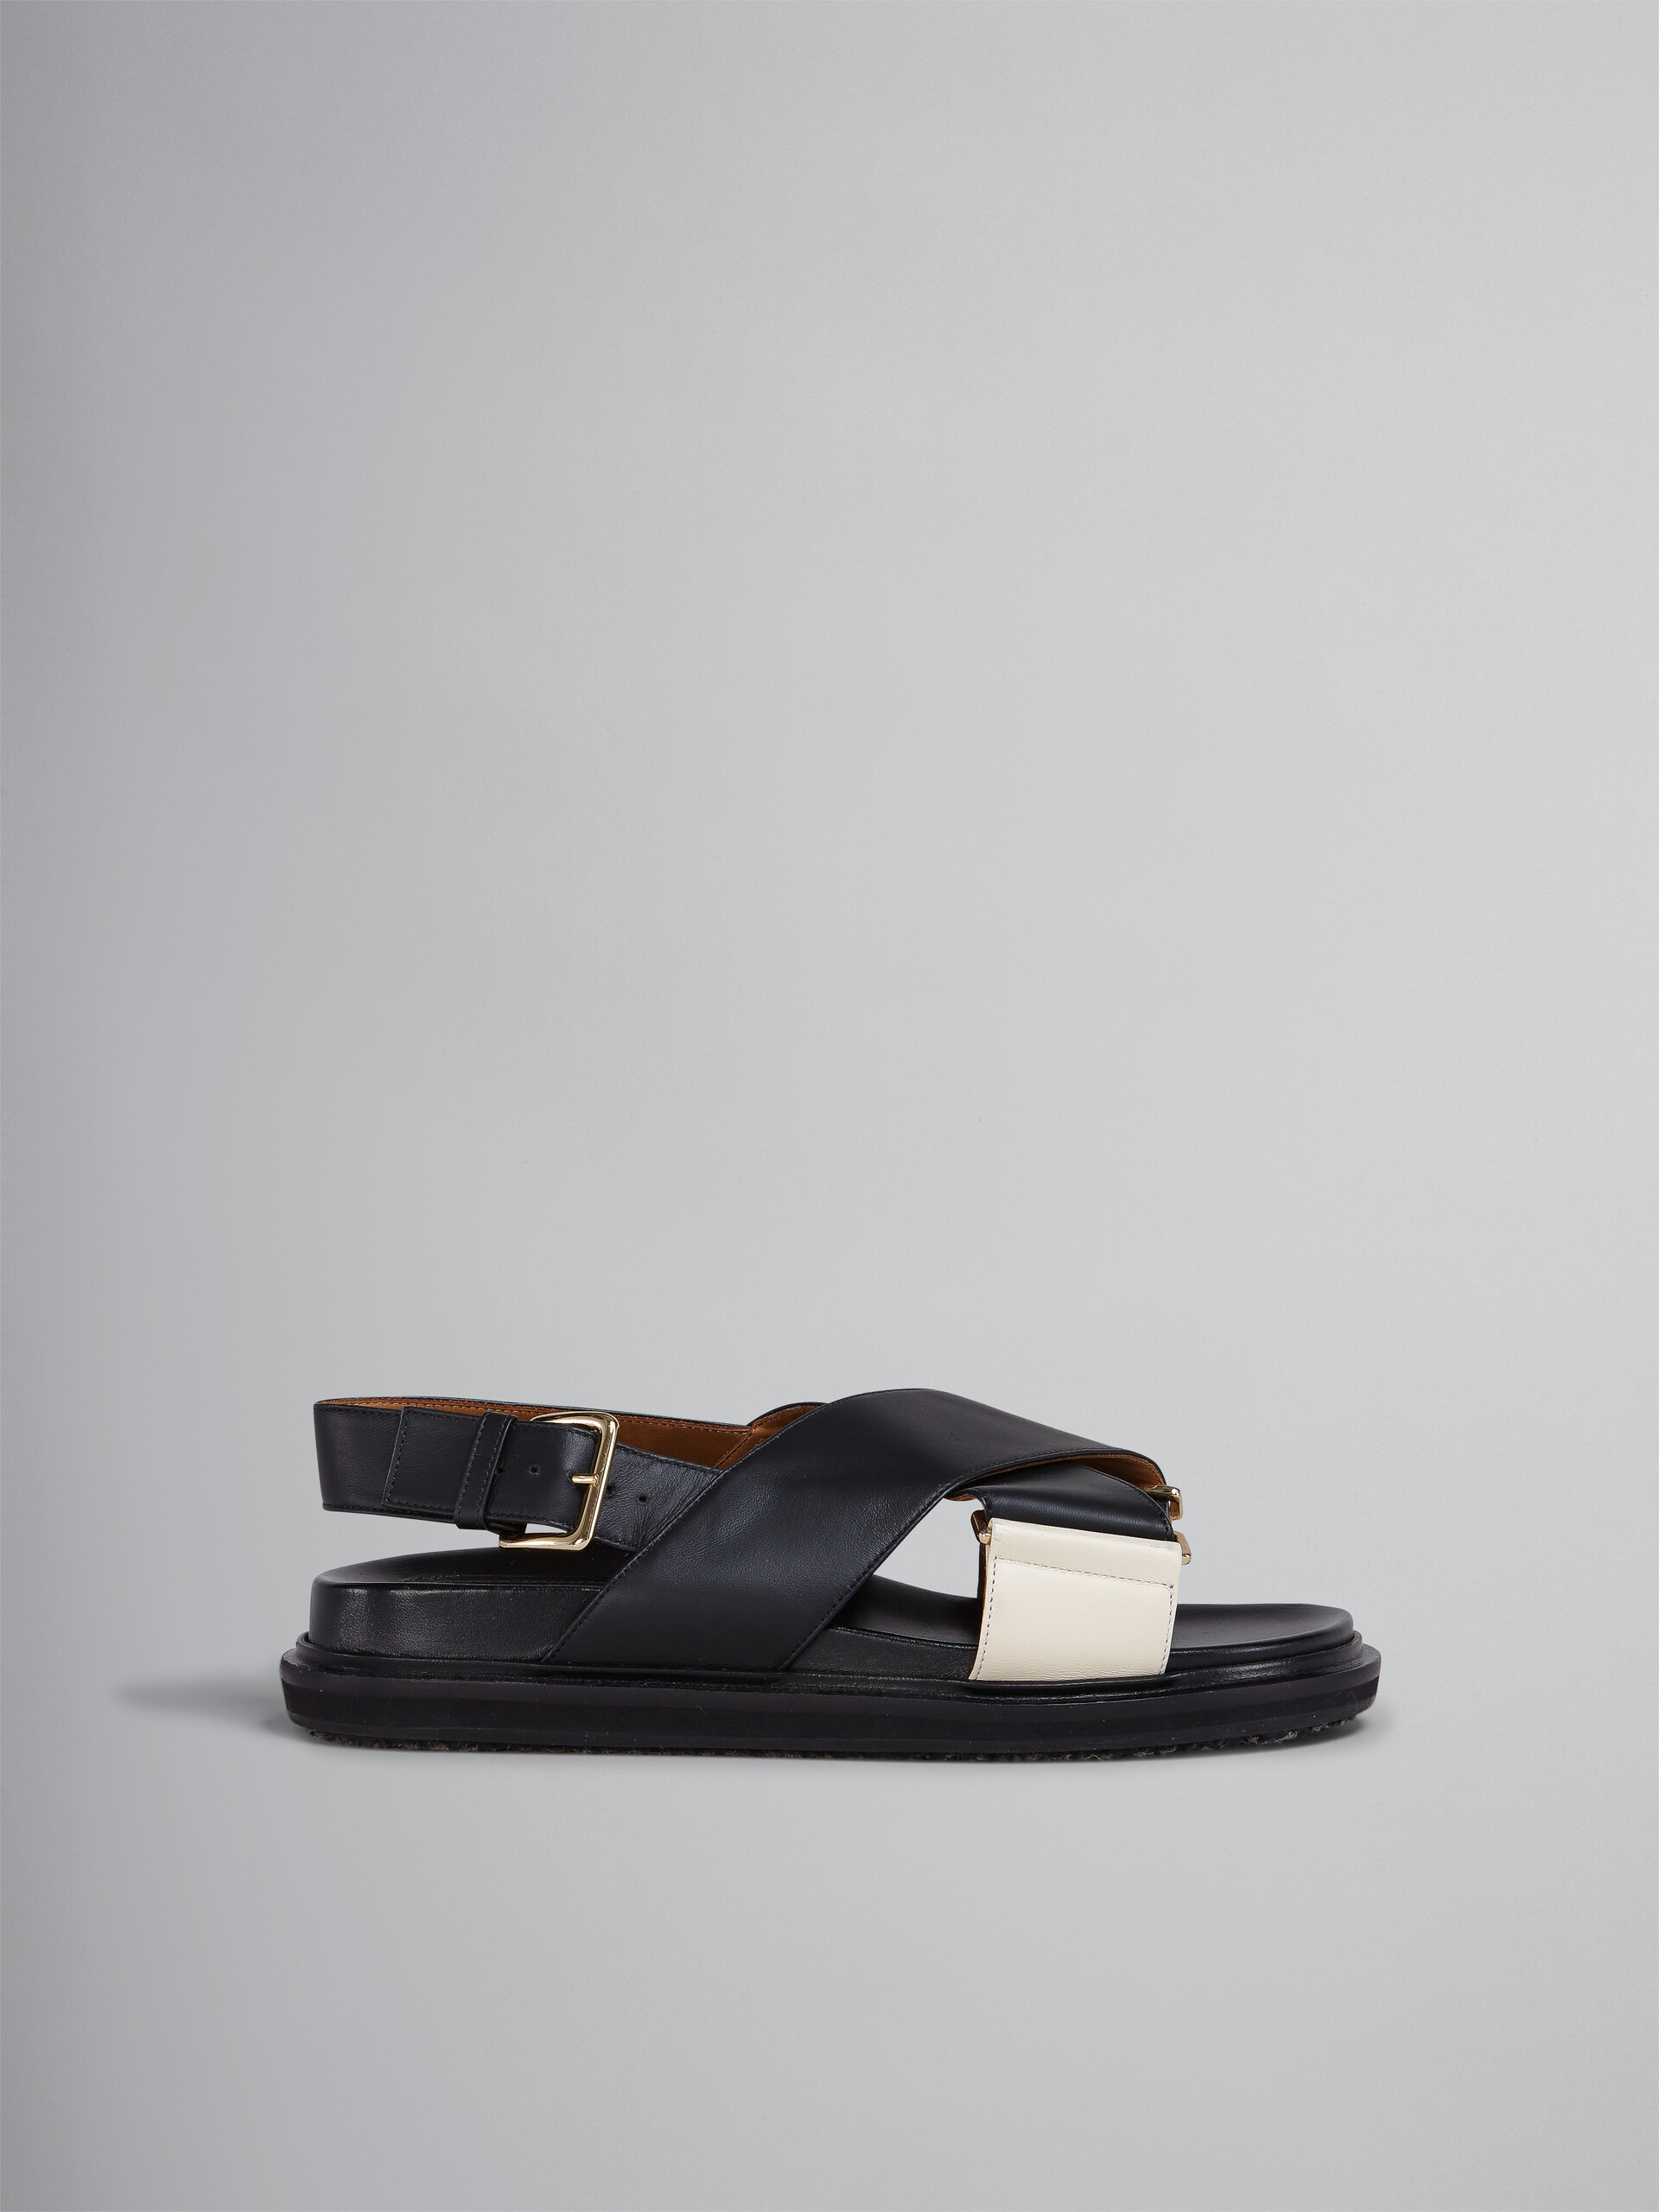 Black and white smooth calf leather fussbett - Sandals - Image 1